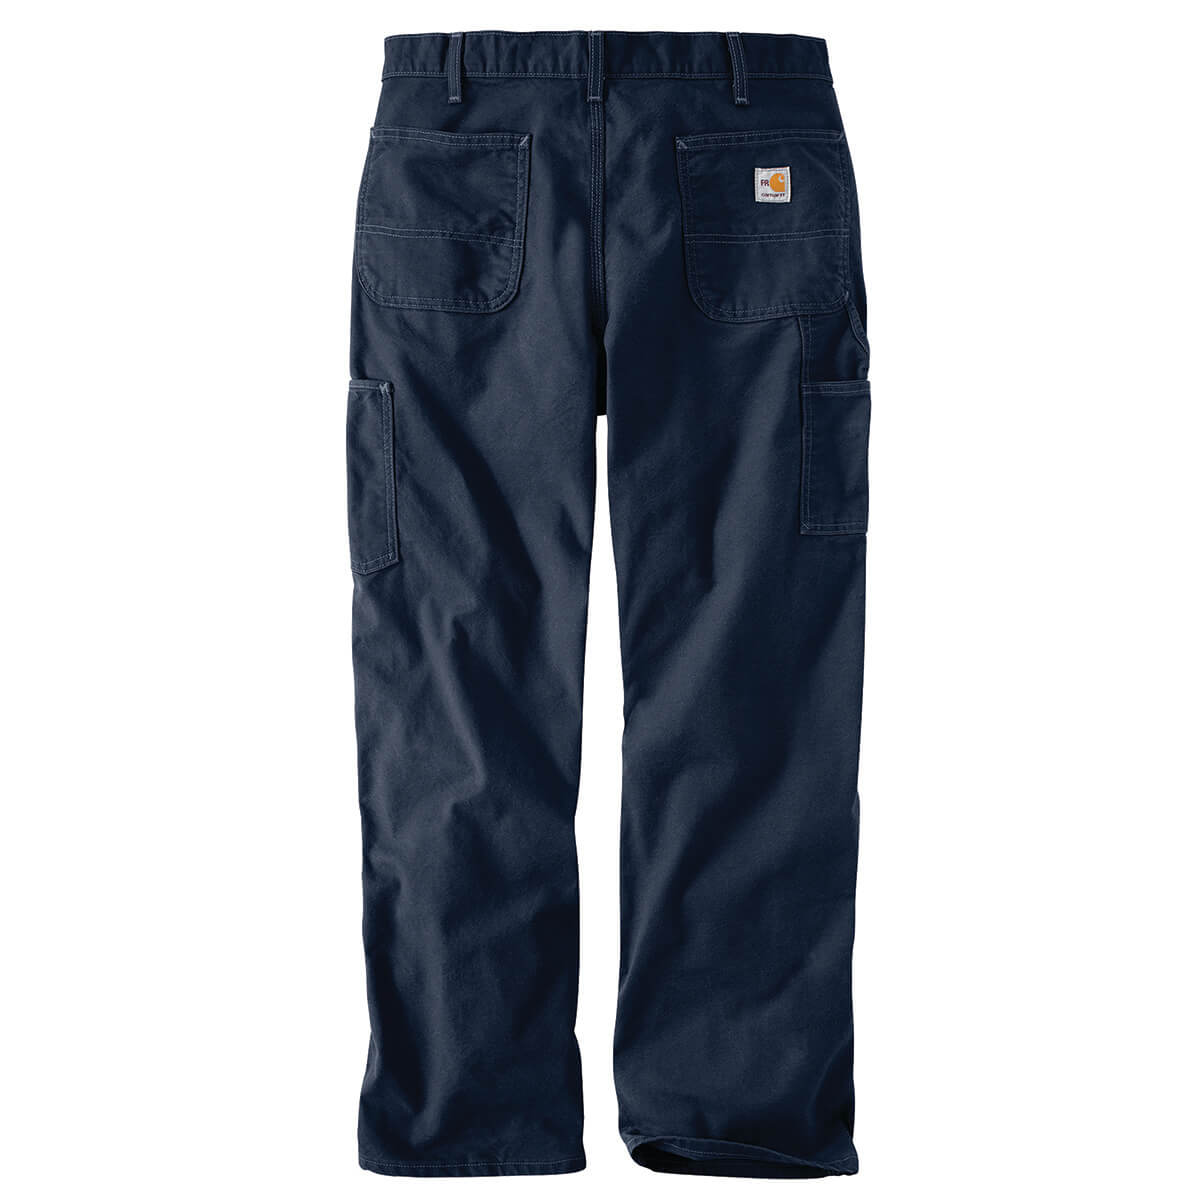 100791 - Carhartt Men's Flame Resistant Washed Duck Work Dungaree